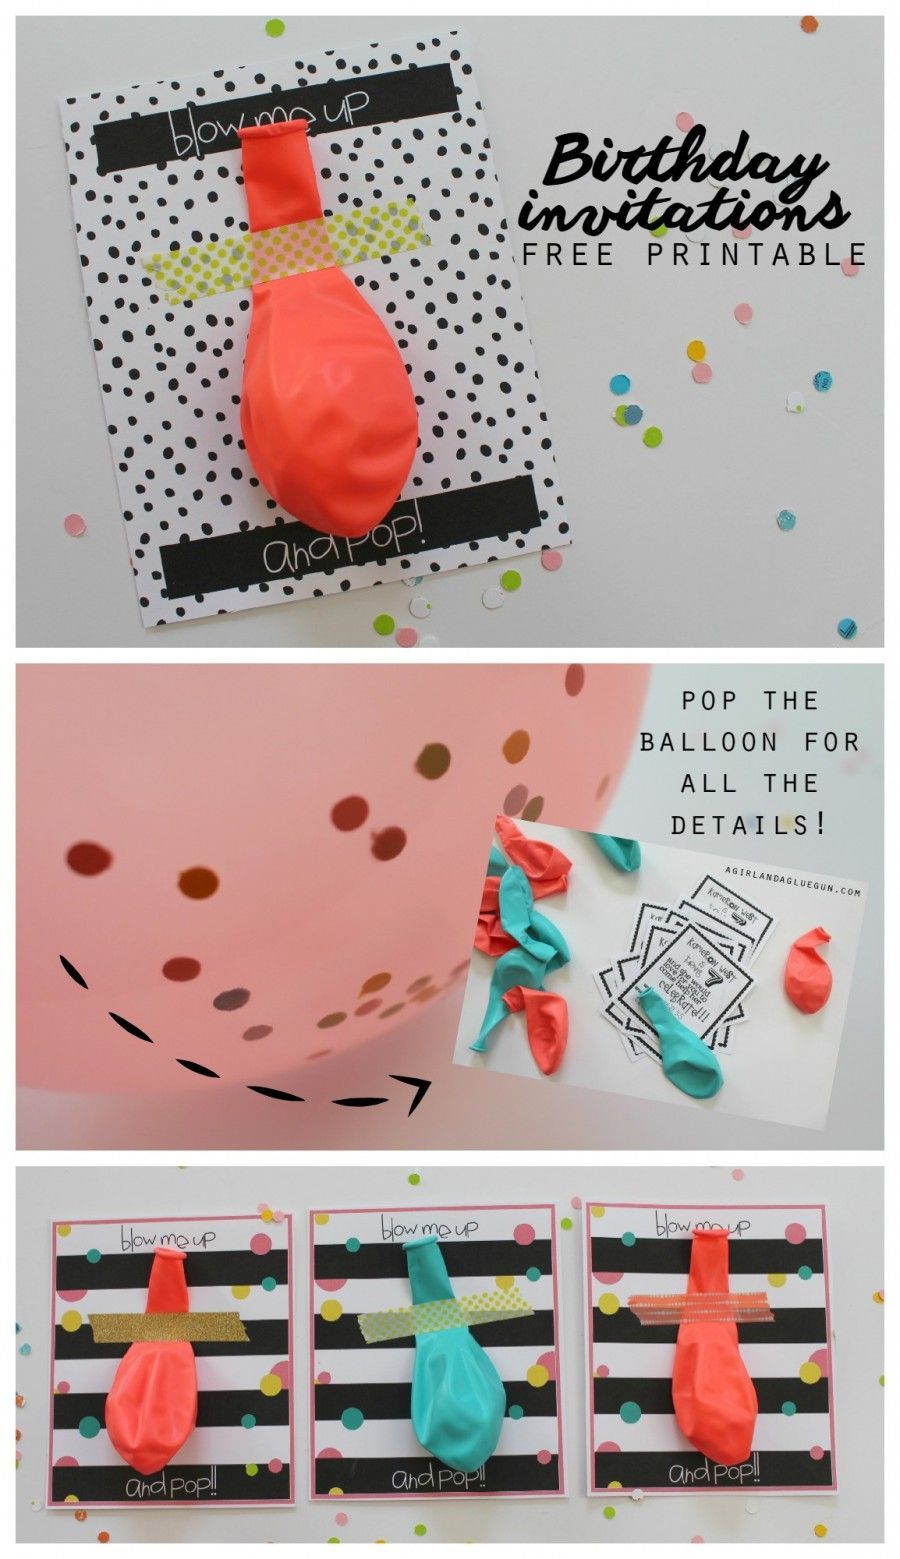 fun and unique birthday printables–pop the balloon and hidden inside is all the details!